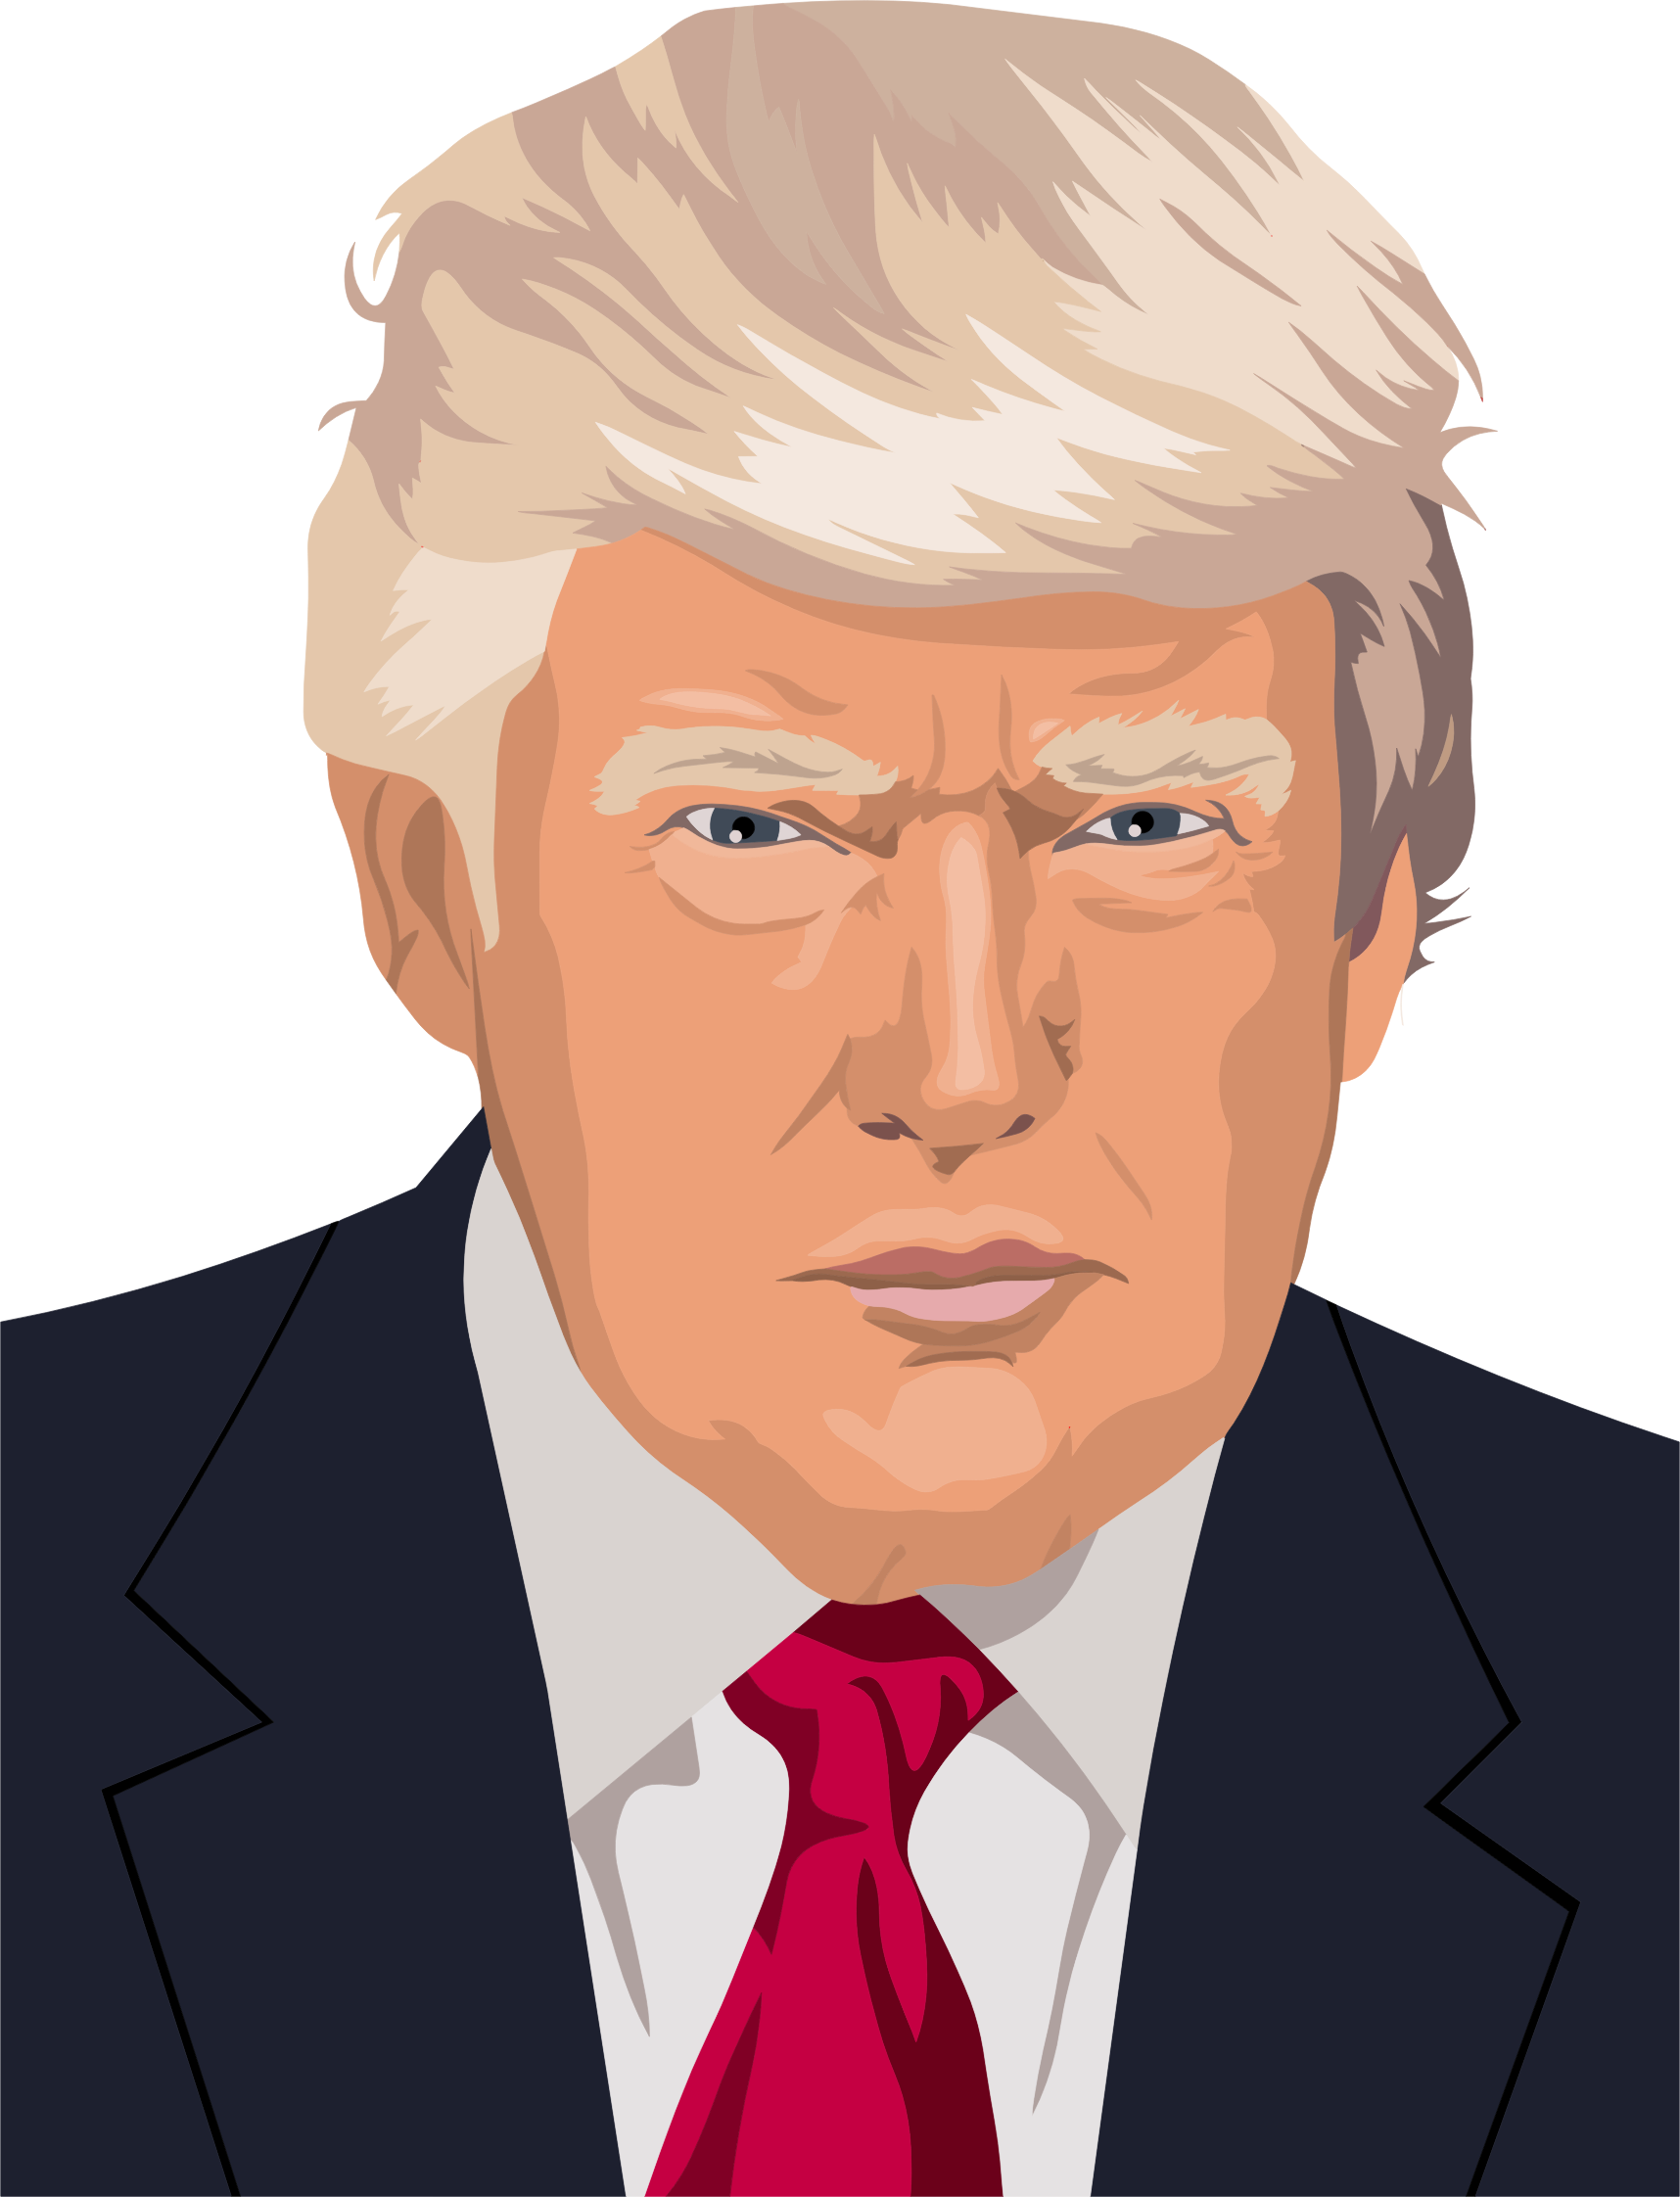 Caricature Of Donald Trump by